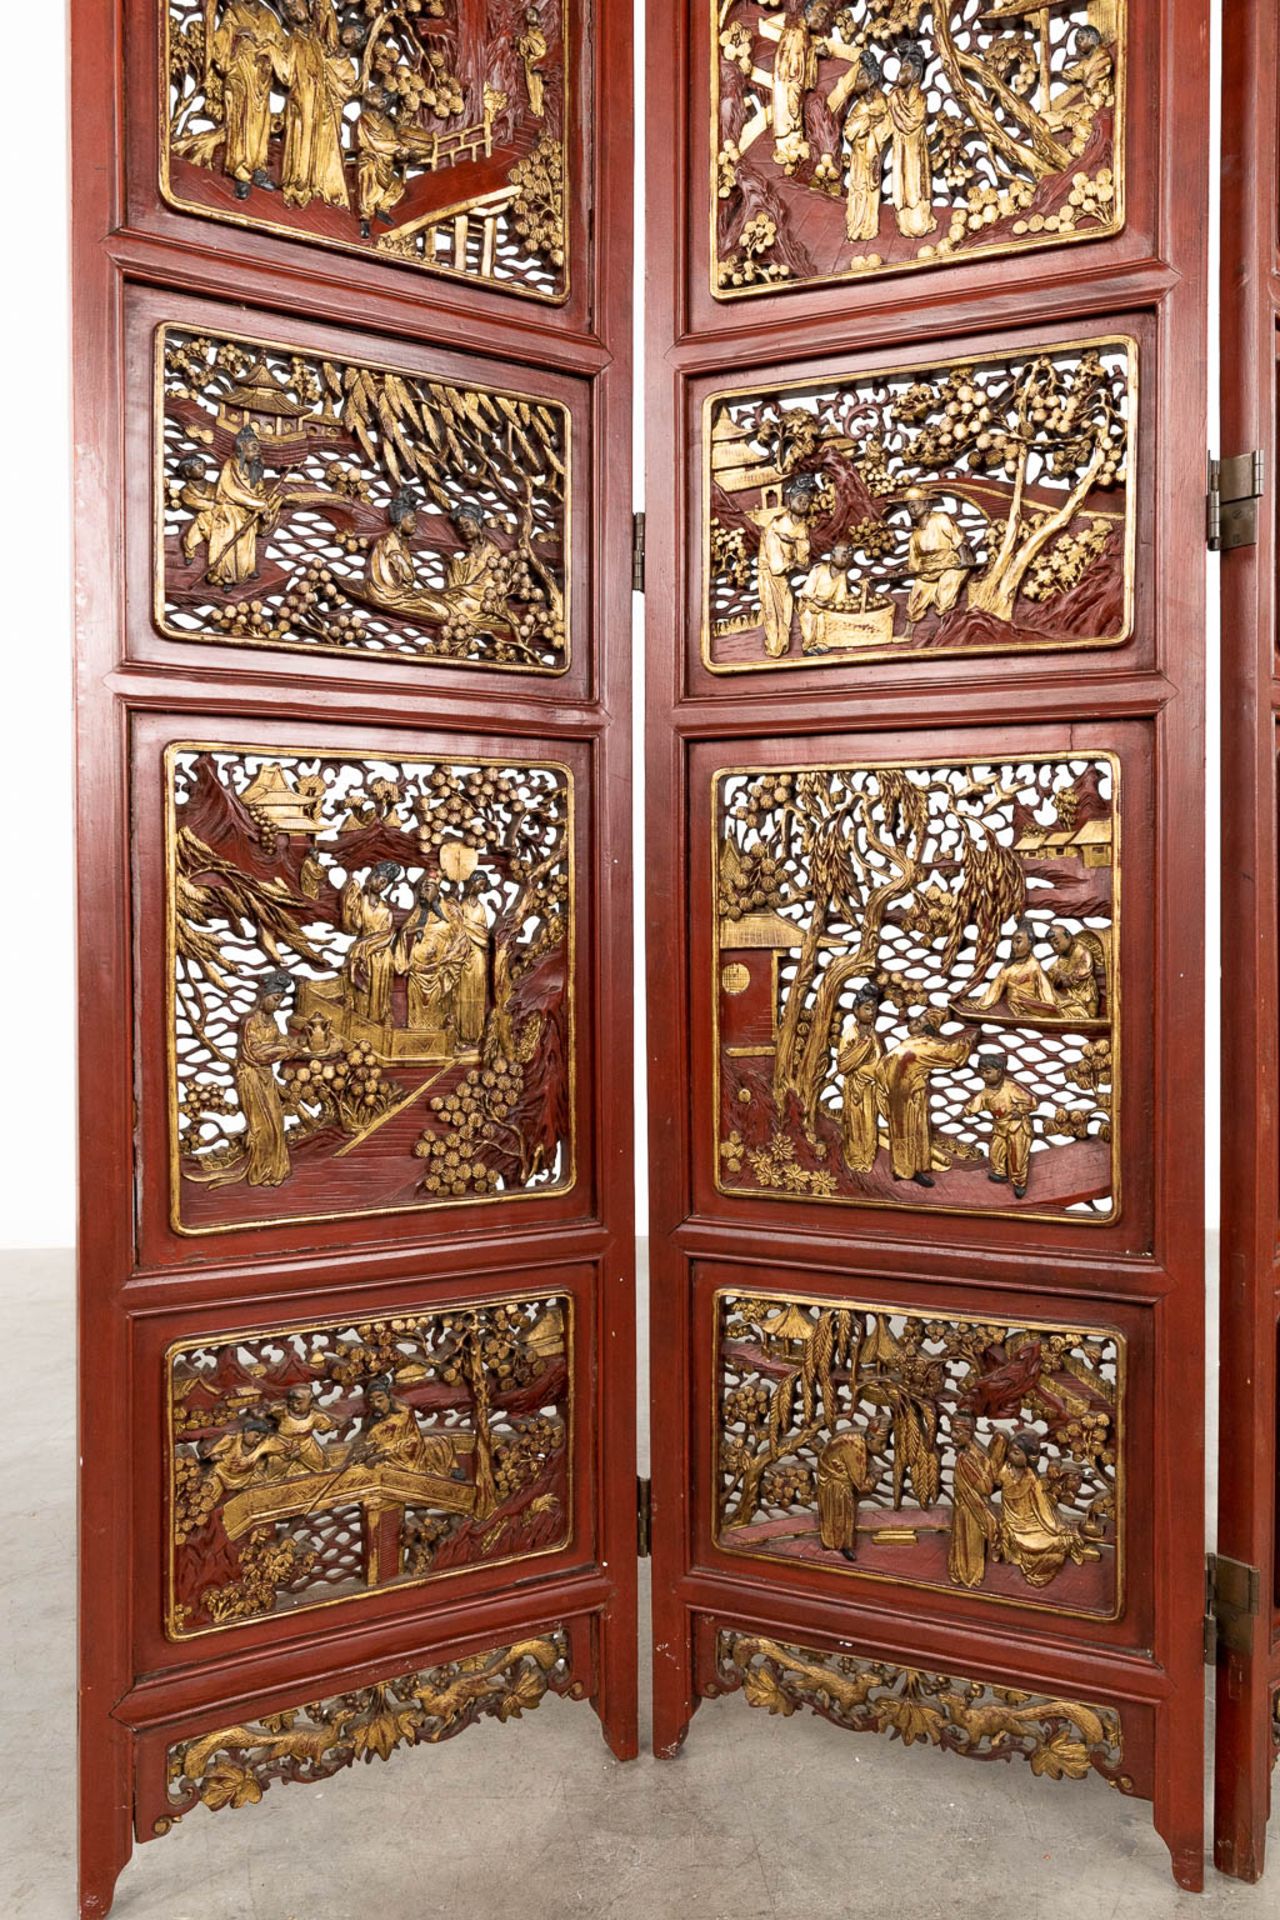 A 4-piece Chinese room divider, sculptured hardwood panels, circa 1900. (W:162 x H:185 cm) - Image 4 of 12